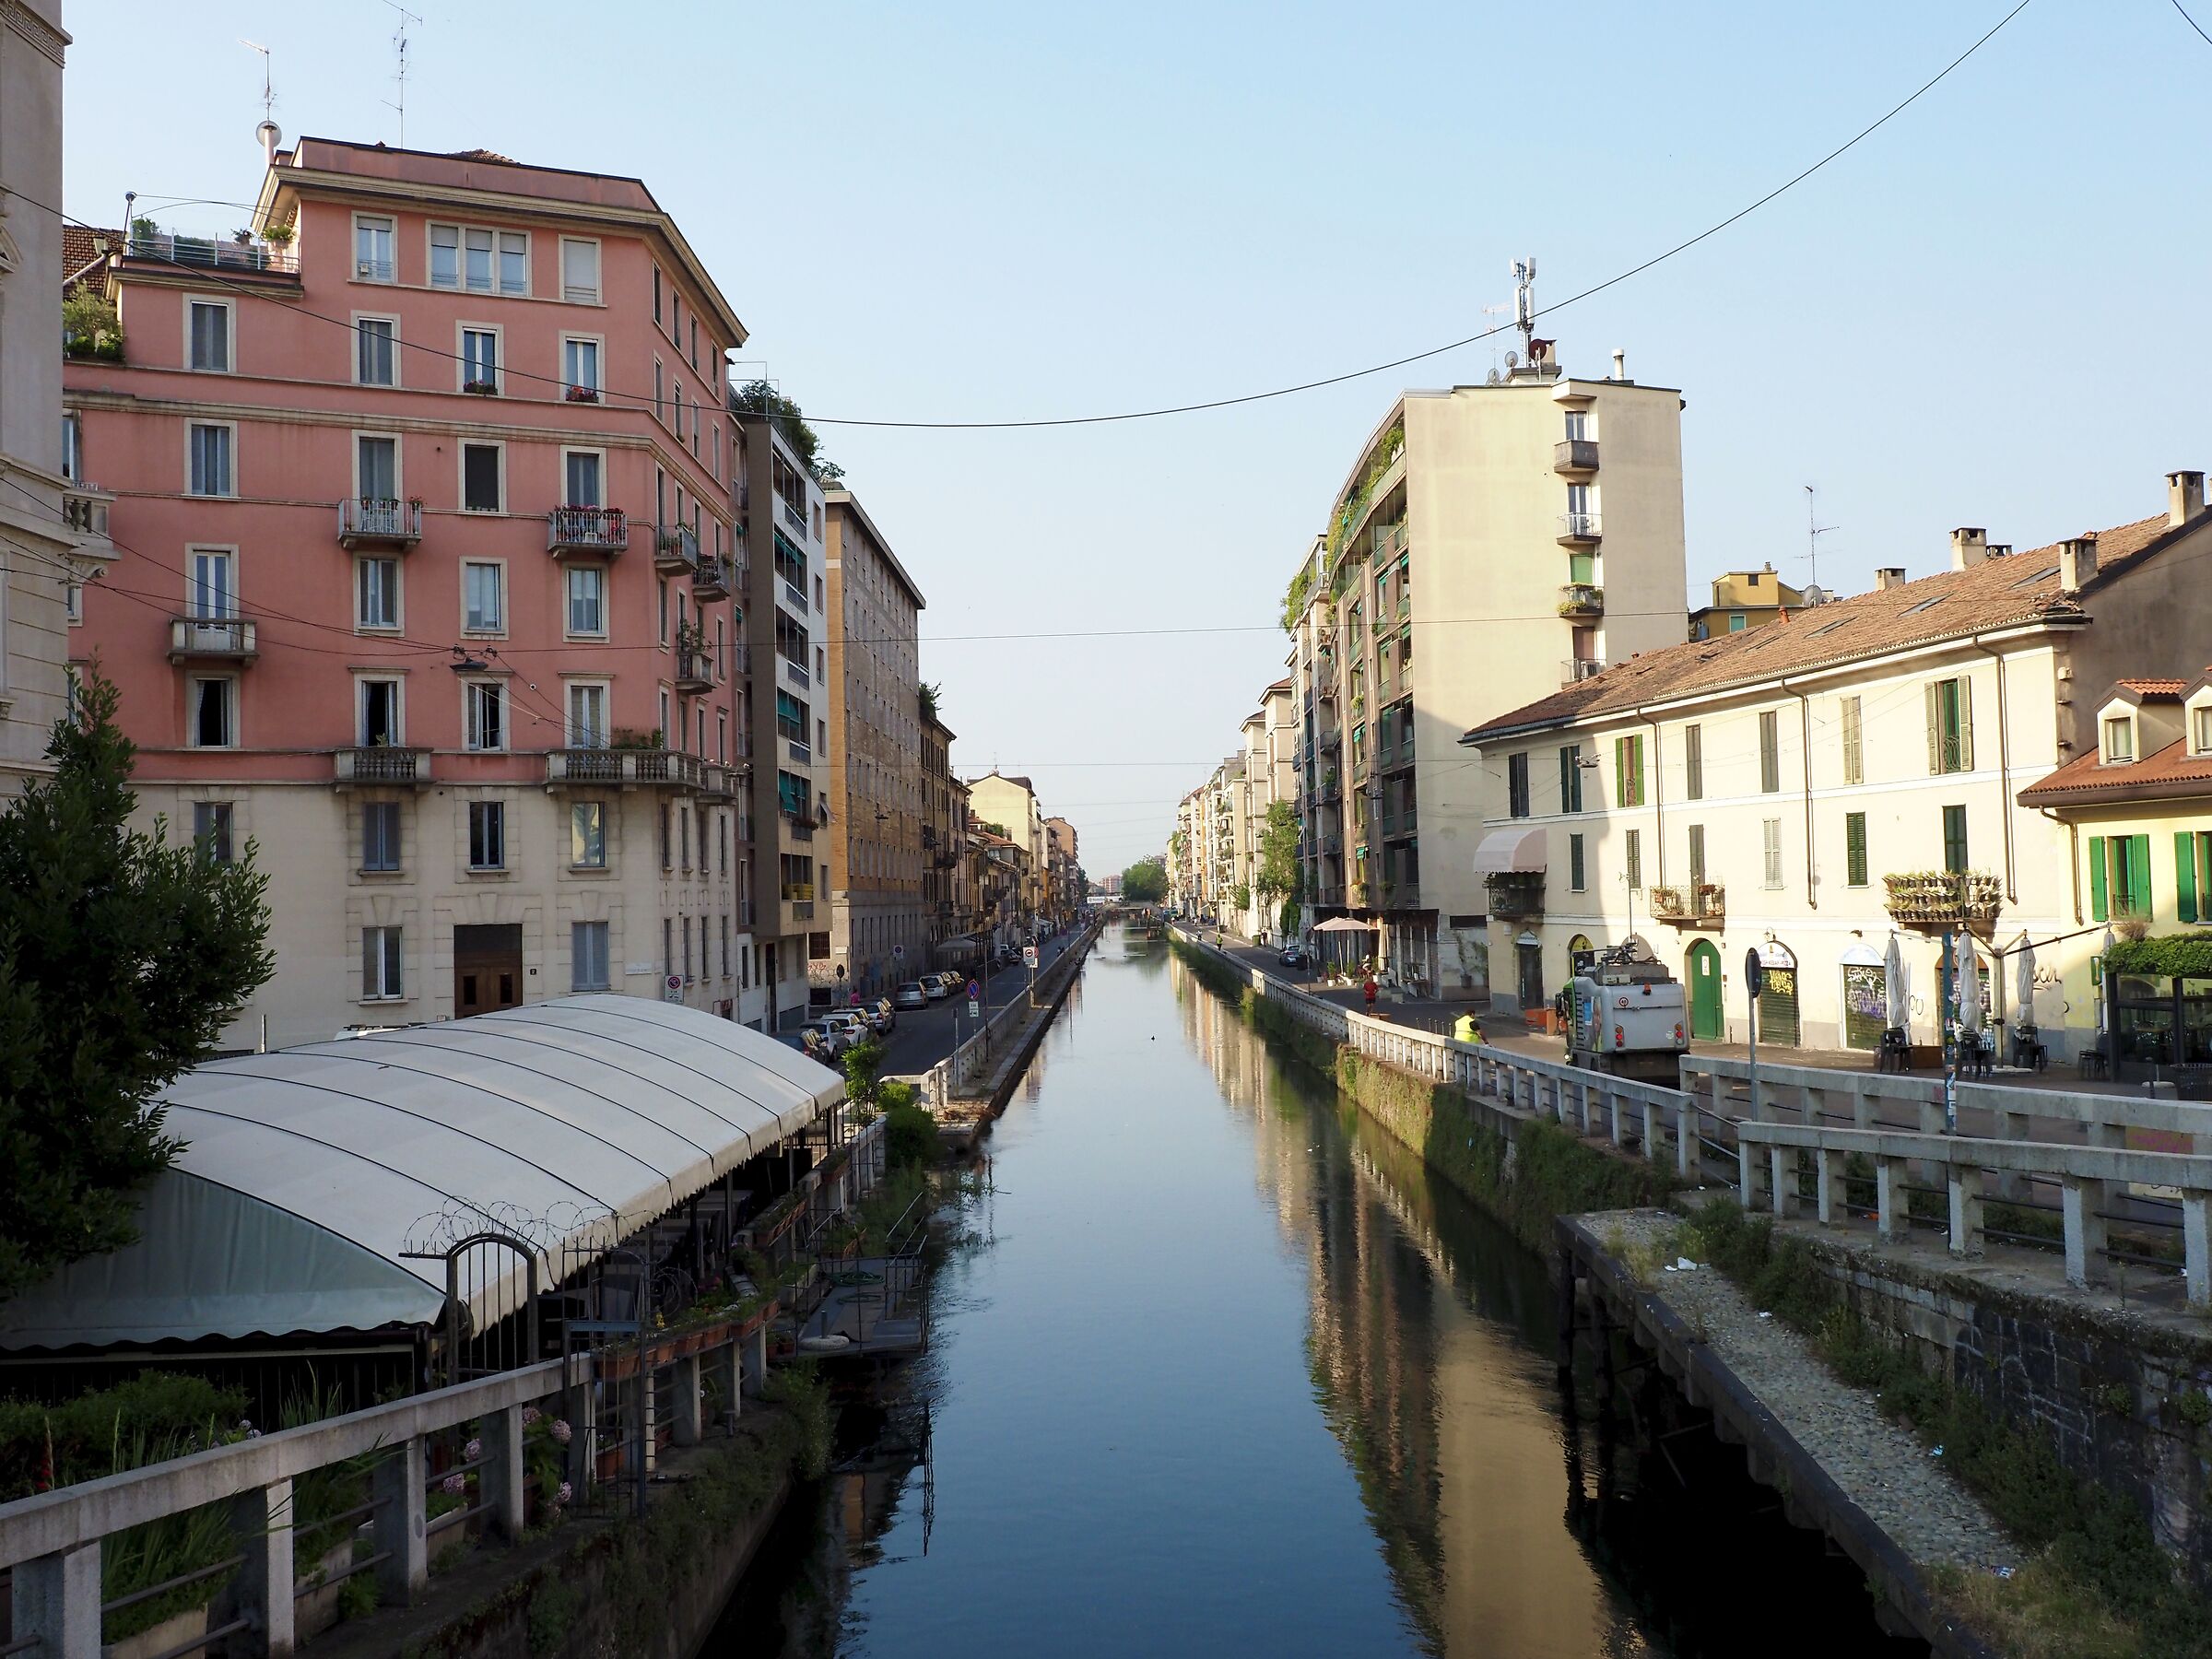 one early summer morning at naviglio Pavese...